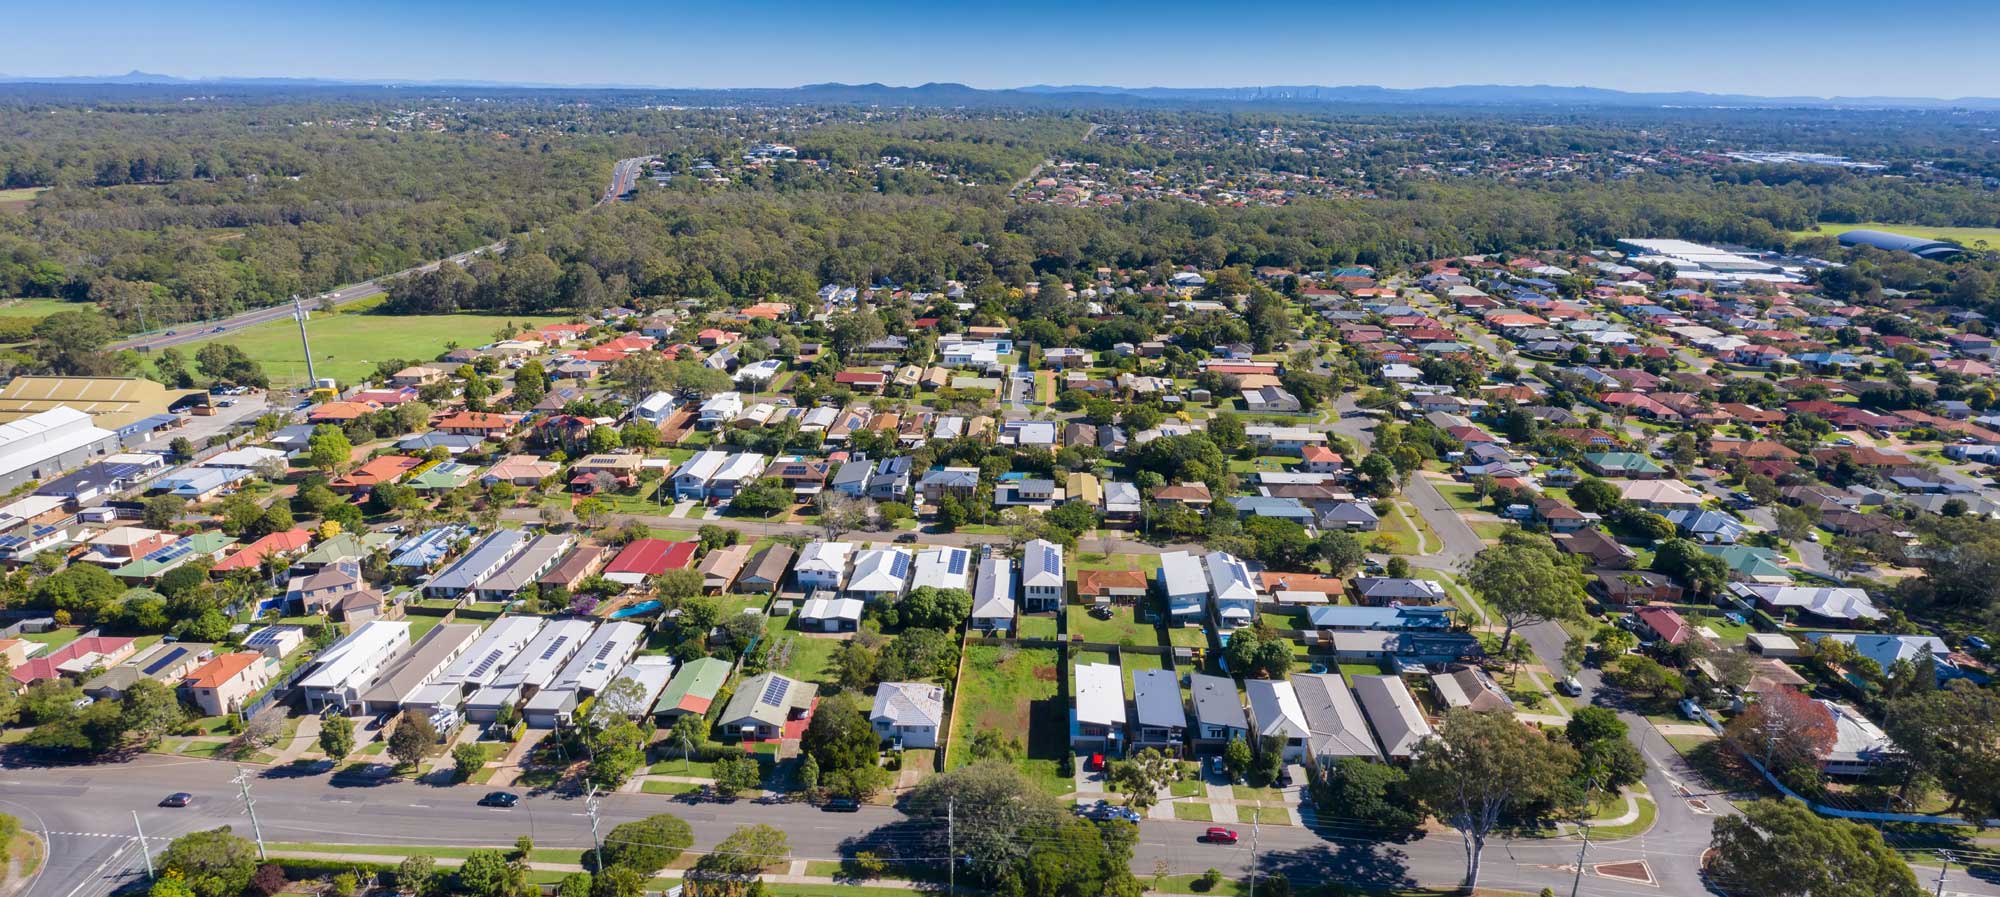 drone photography for property sub division marketing at Ormiston, Redland Bay area